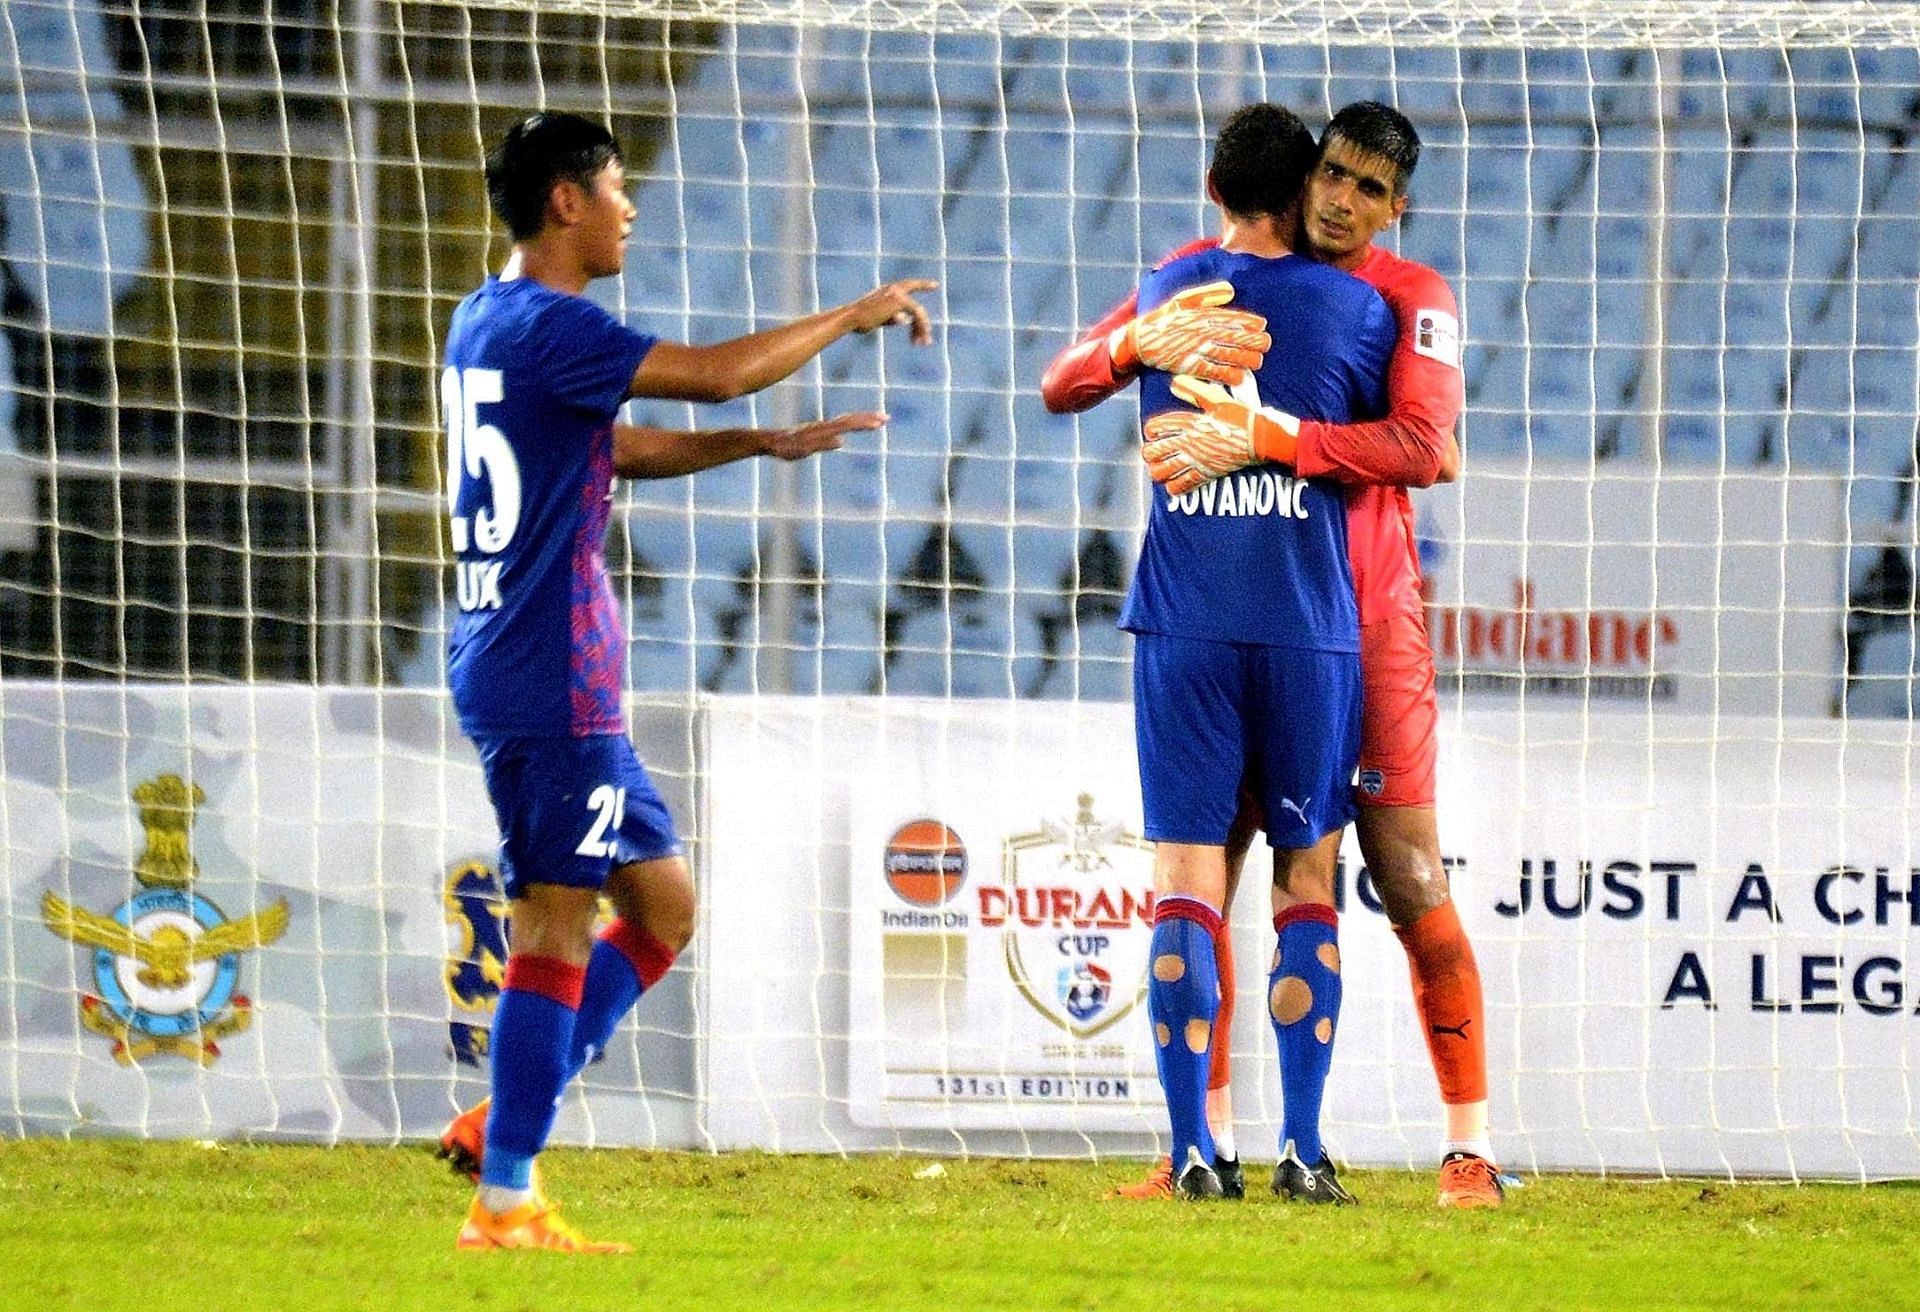 Bengaluru FC defeated Hyderabad FC in the 2022 Durand Cup semifinals. [Credits: Suman Chattopadhyay / www.imagesolutionr.in]